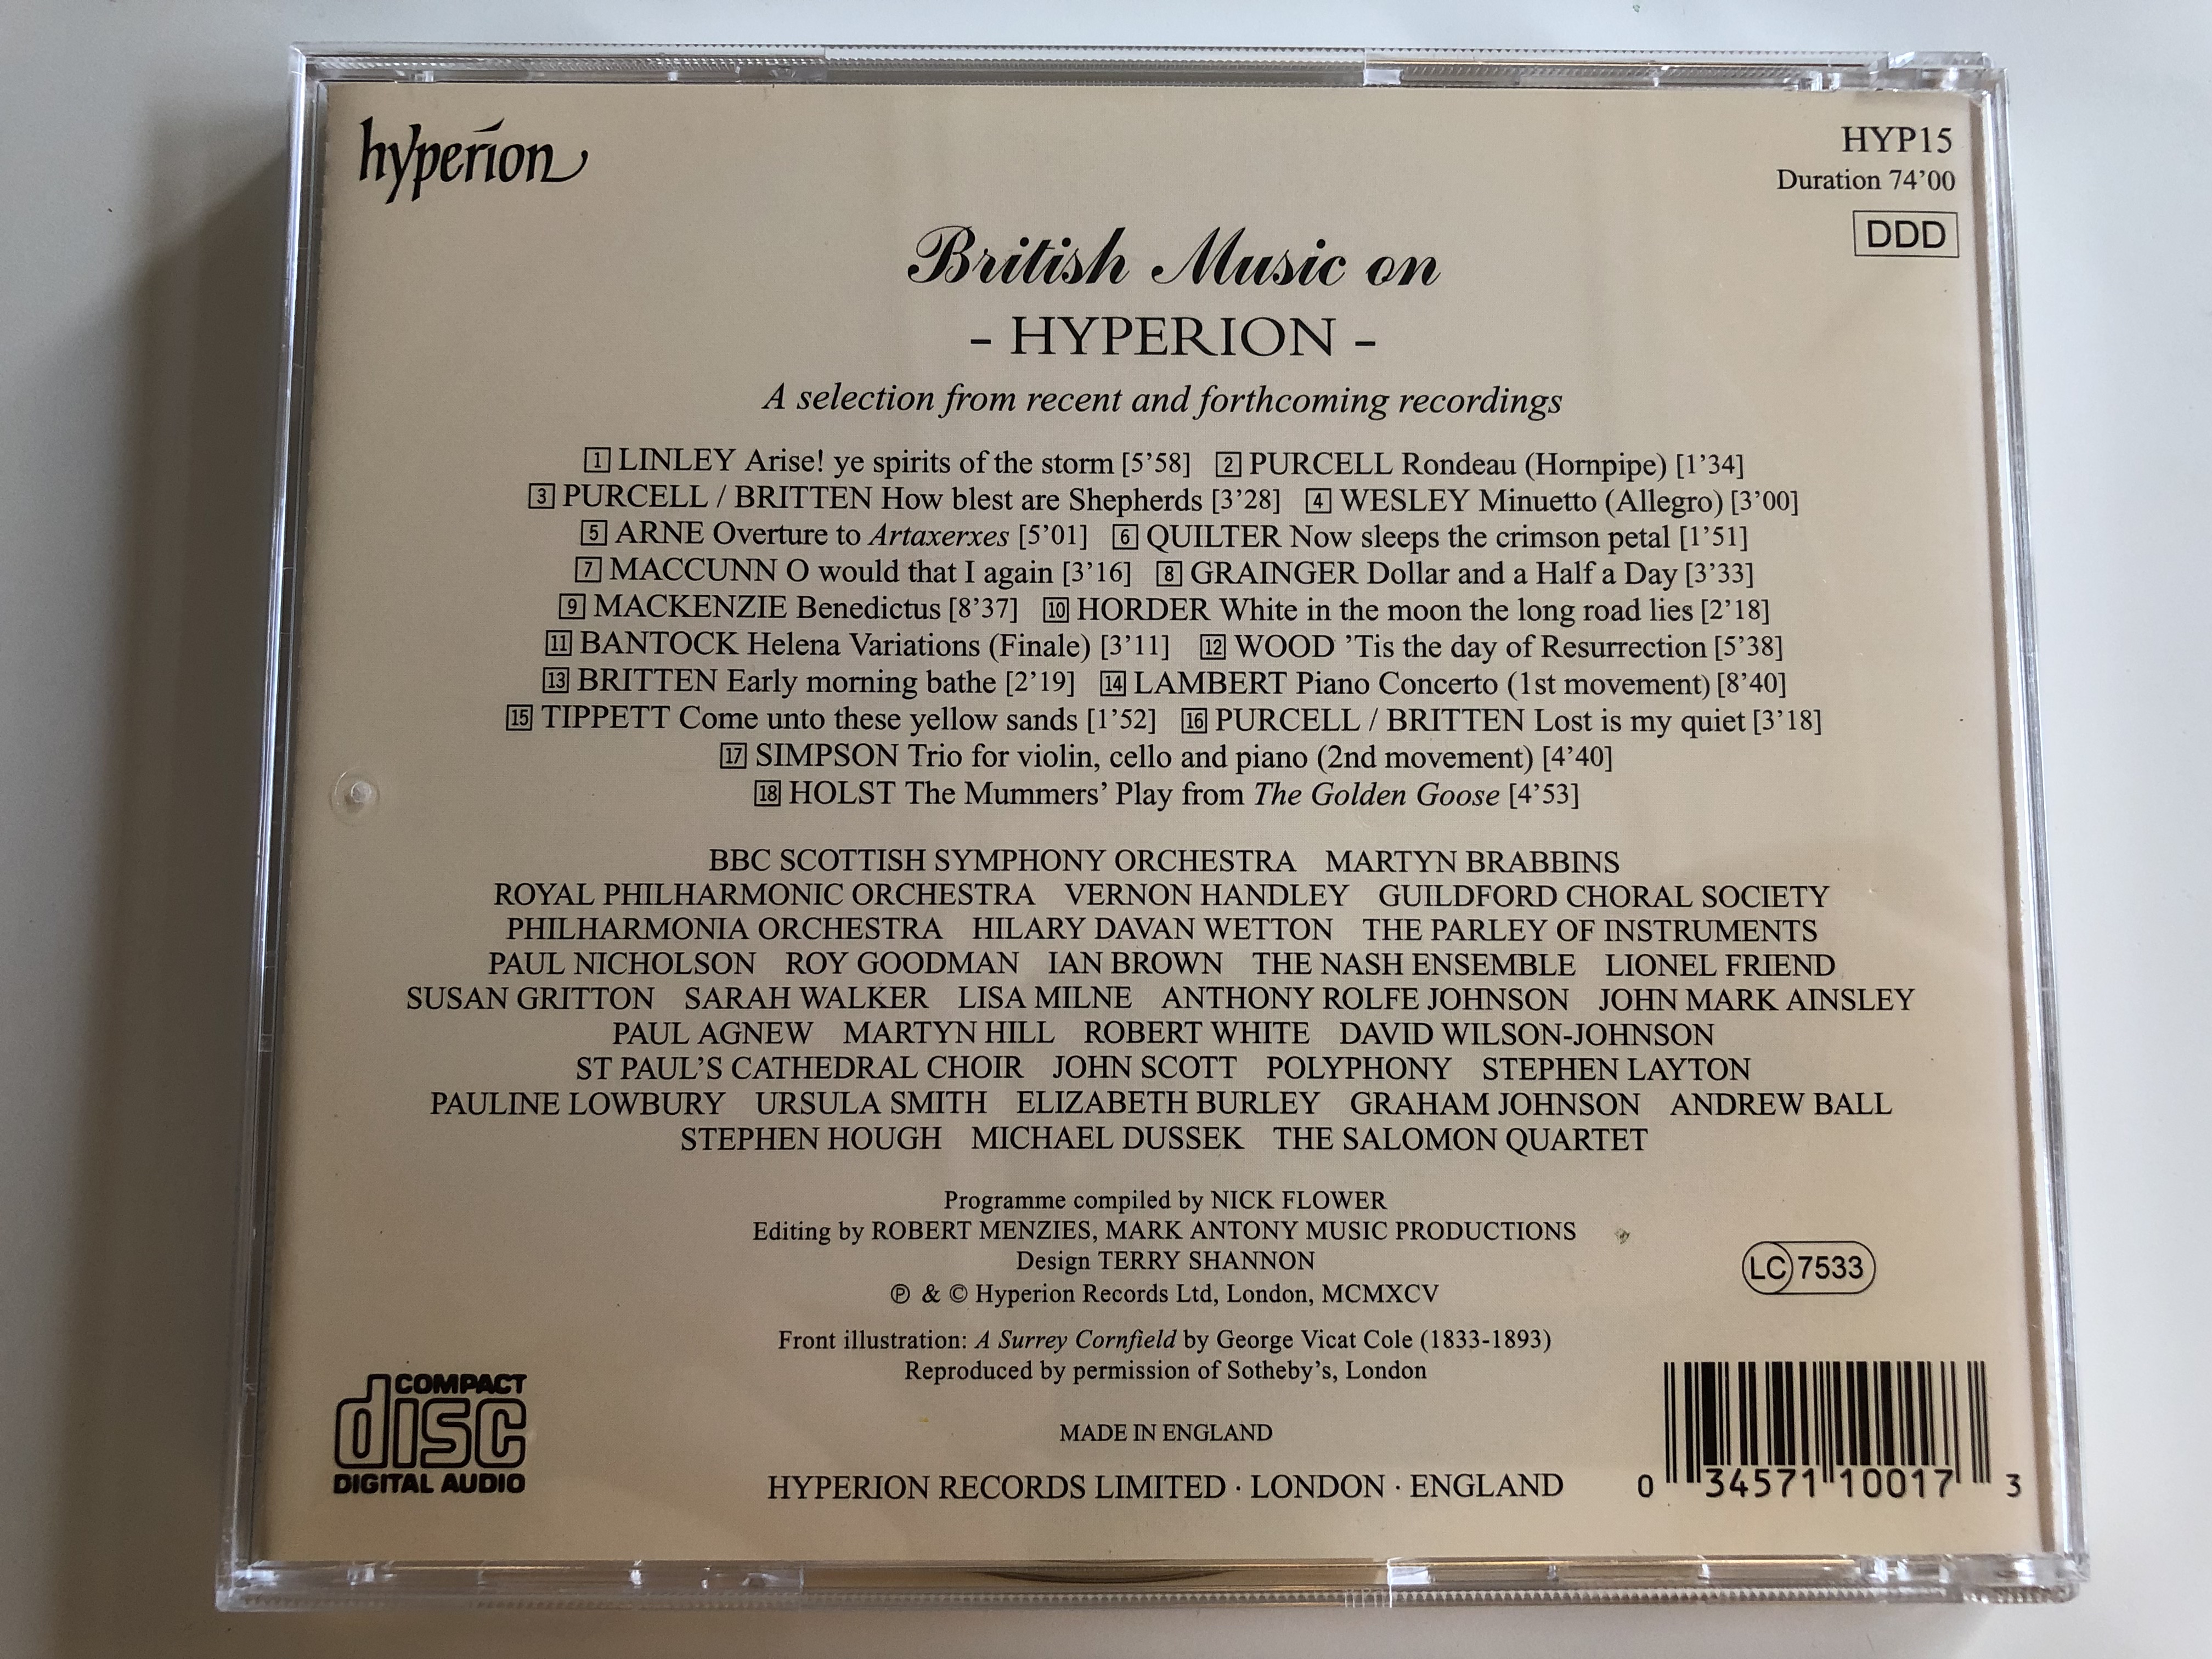 -british-music-on-hyperion-a-selection-from-recent-and-forthcoming-recordings-audio-cd-1995-hyp15-7-.jpg